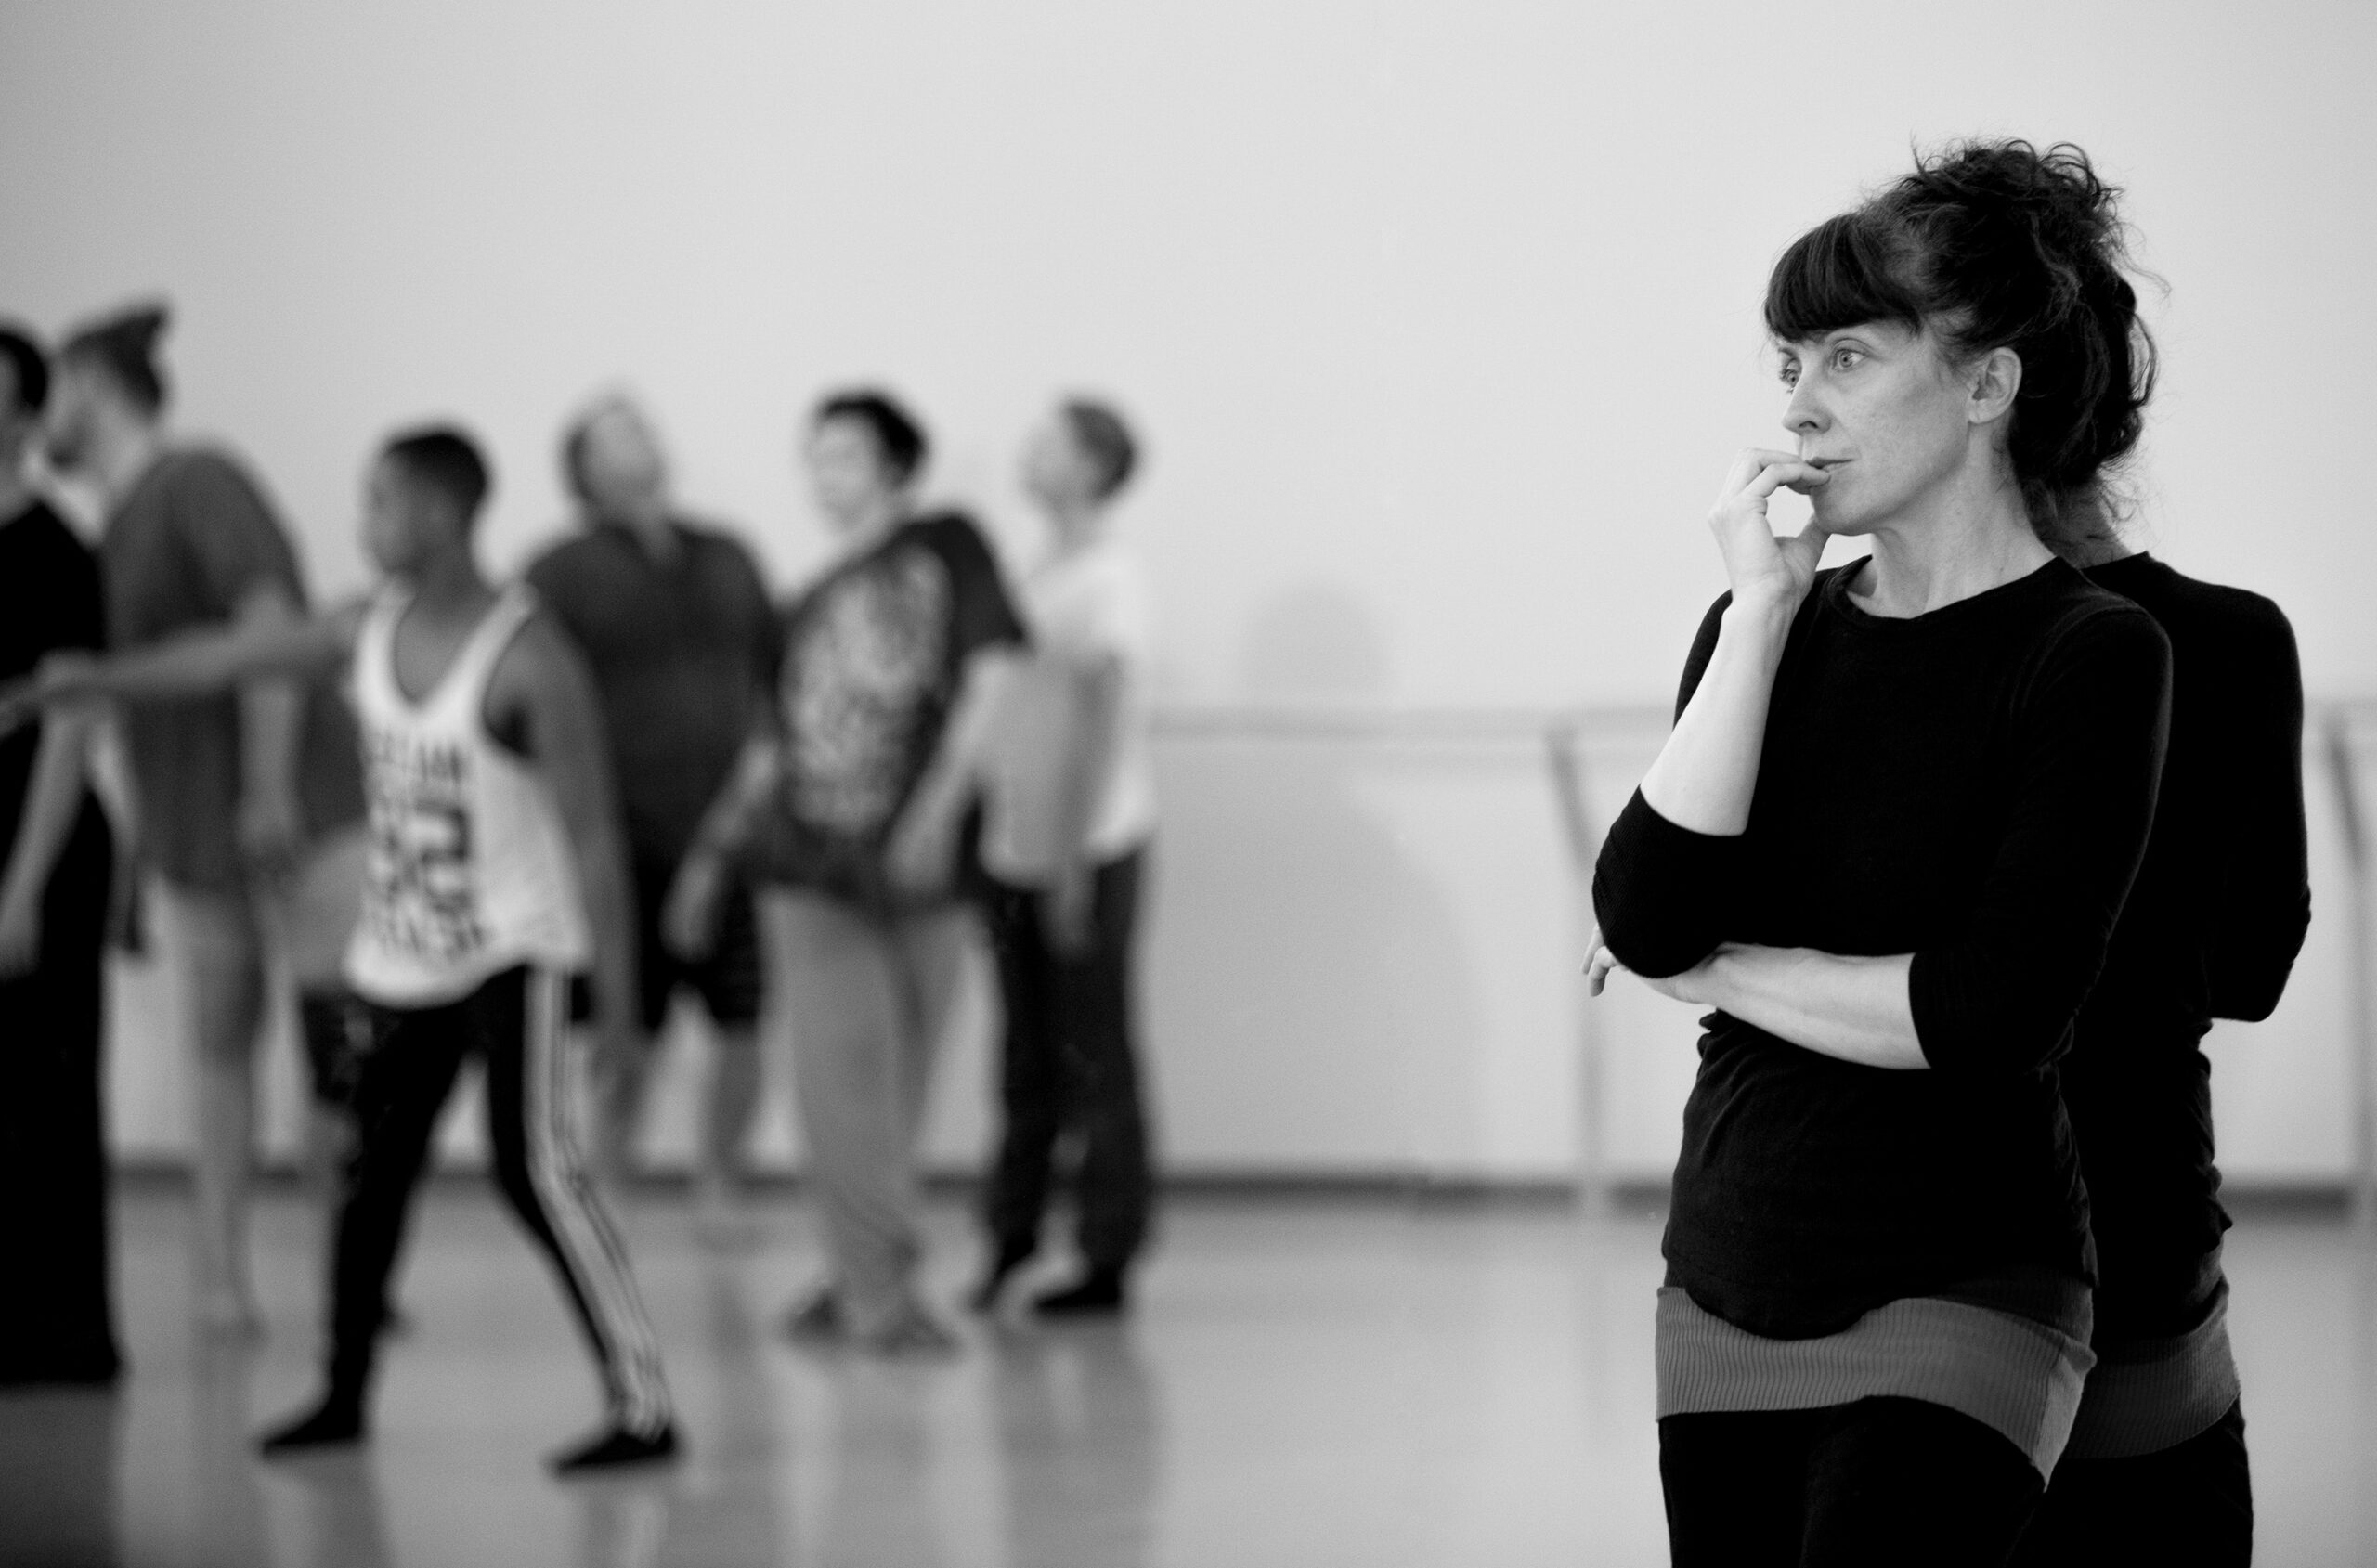 Lucy Rupert in rehearsal for 8 minutes and 17 seconds